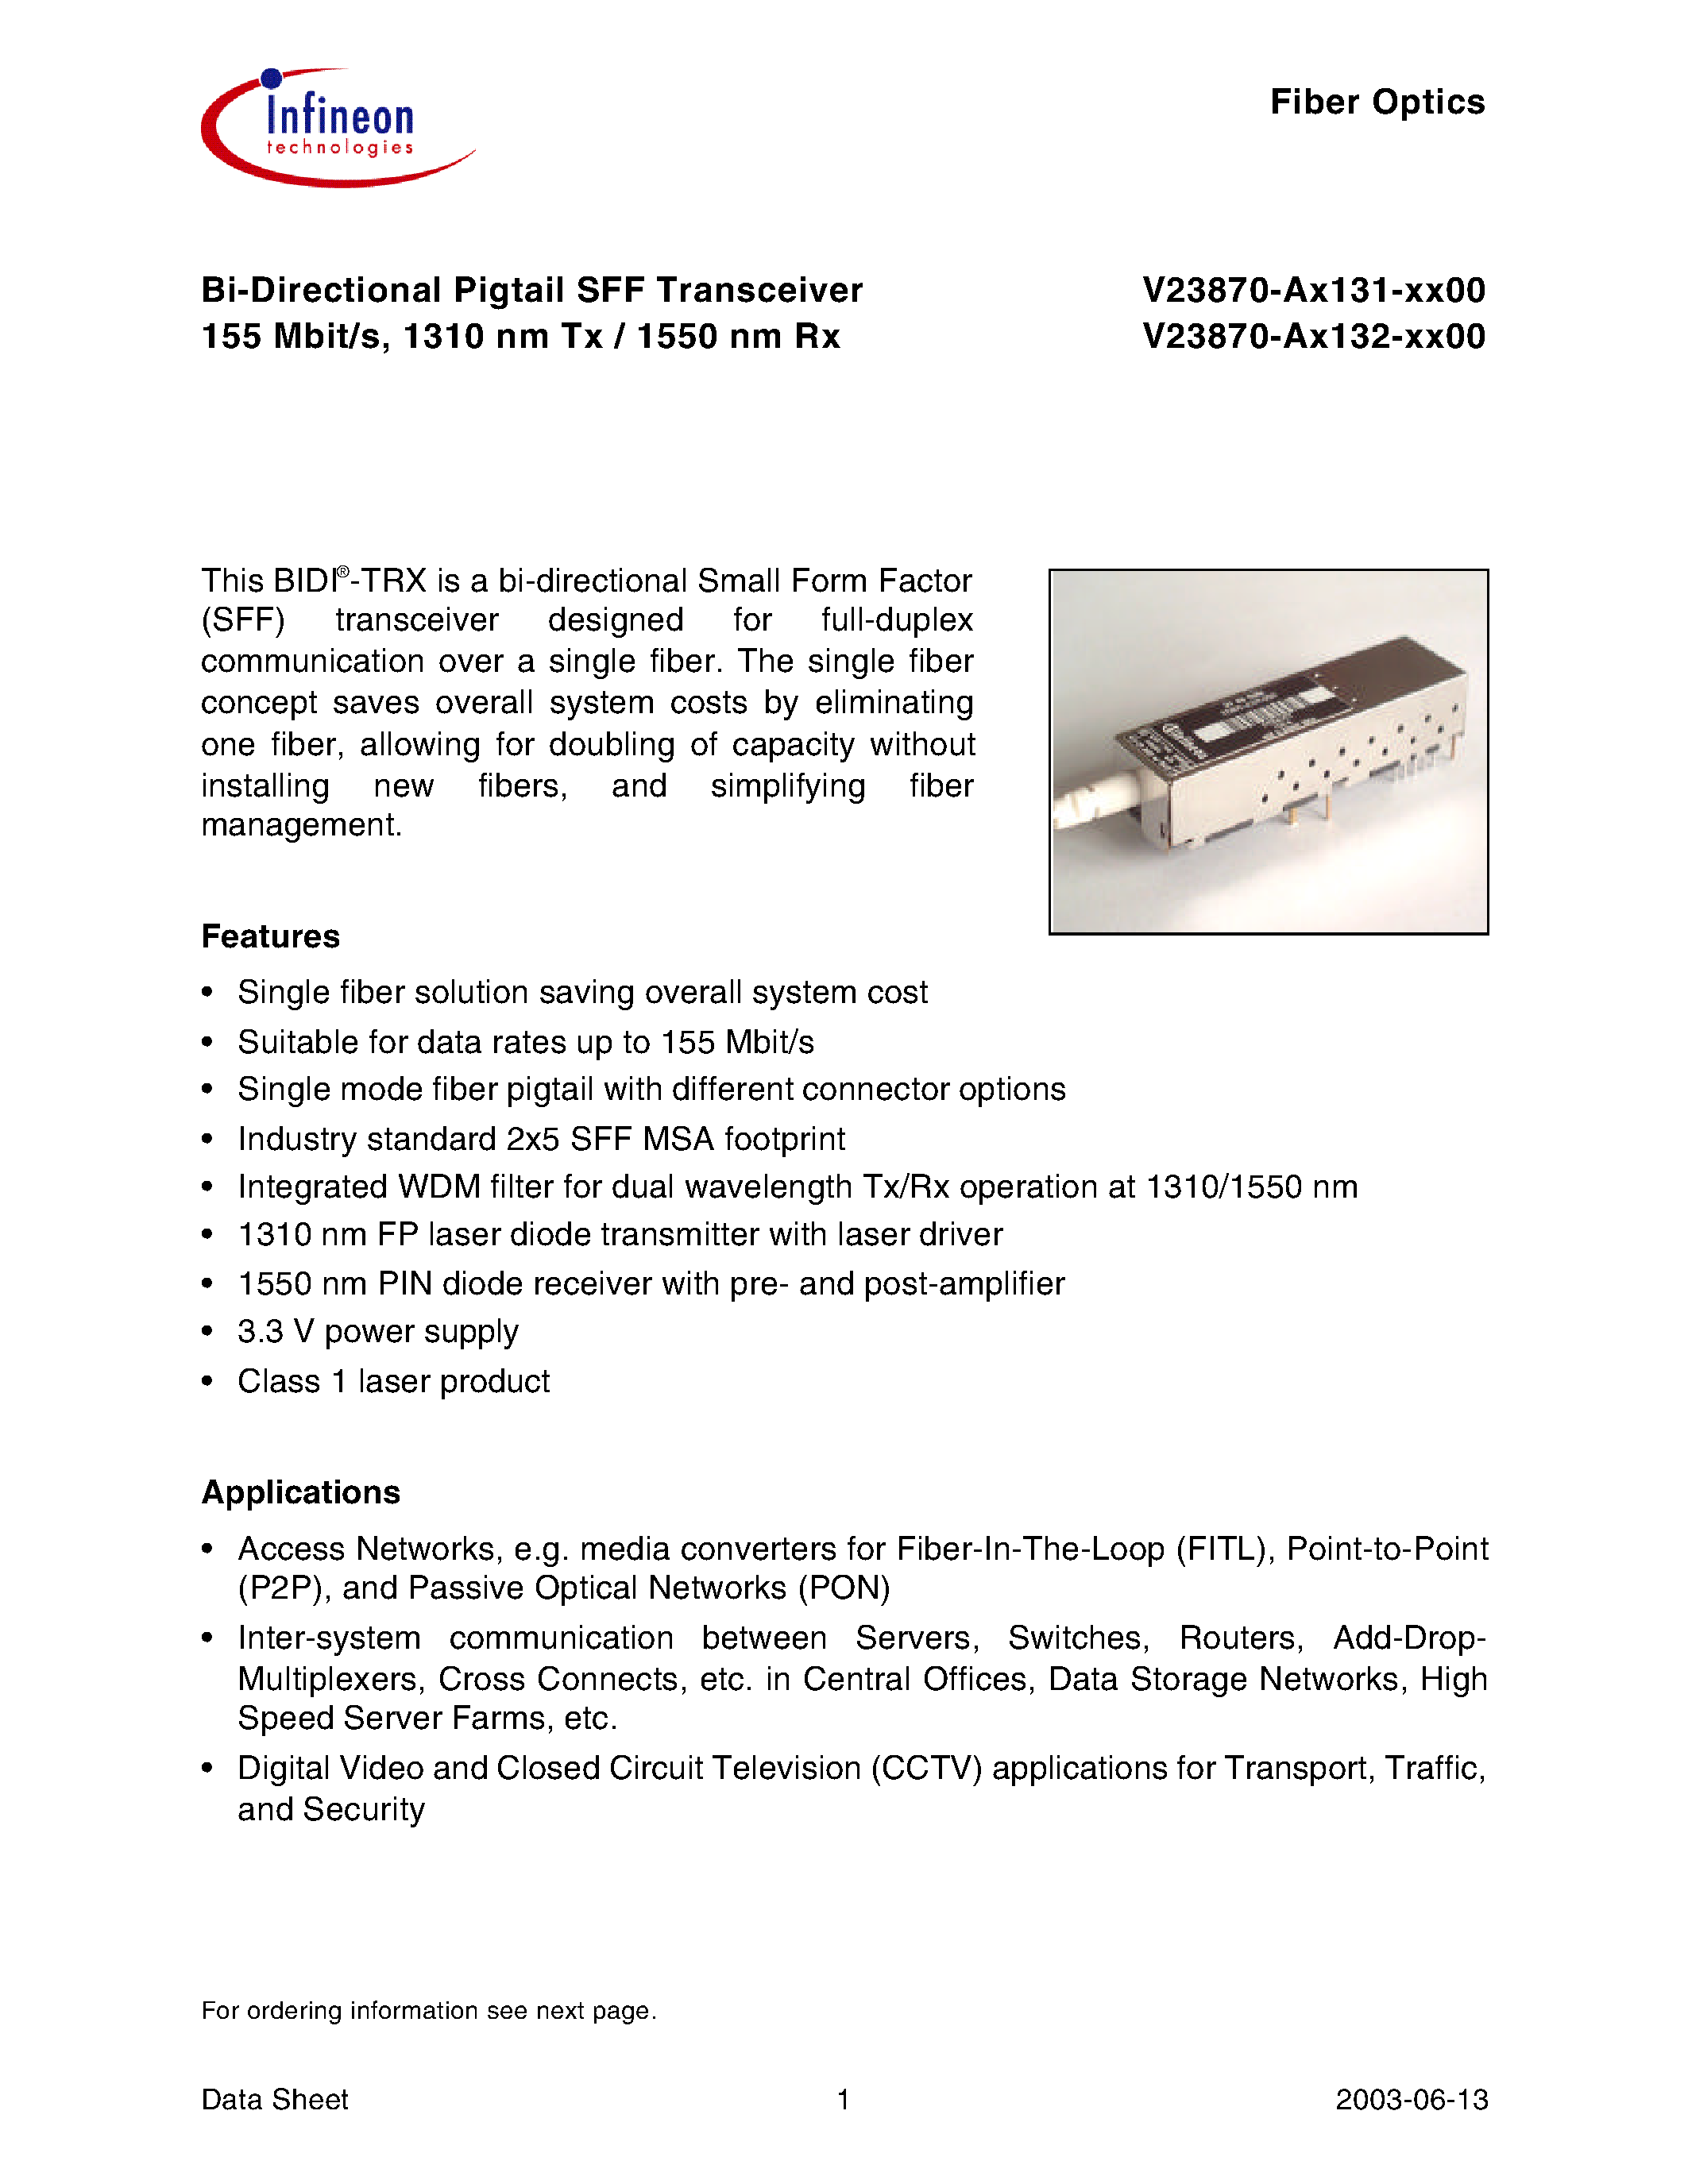 Datasheet V23870-A1131-K100 - Bi-Directional Pigtail SFF Transceiver 155 Mbit/s/ 1310 nm Tx / 1550 nm Rx page 1